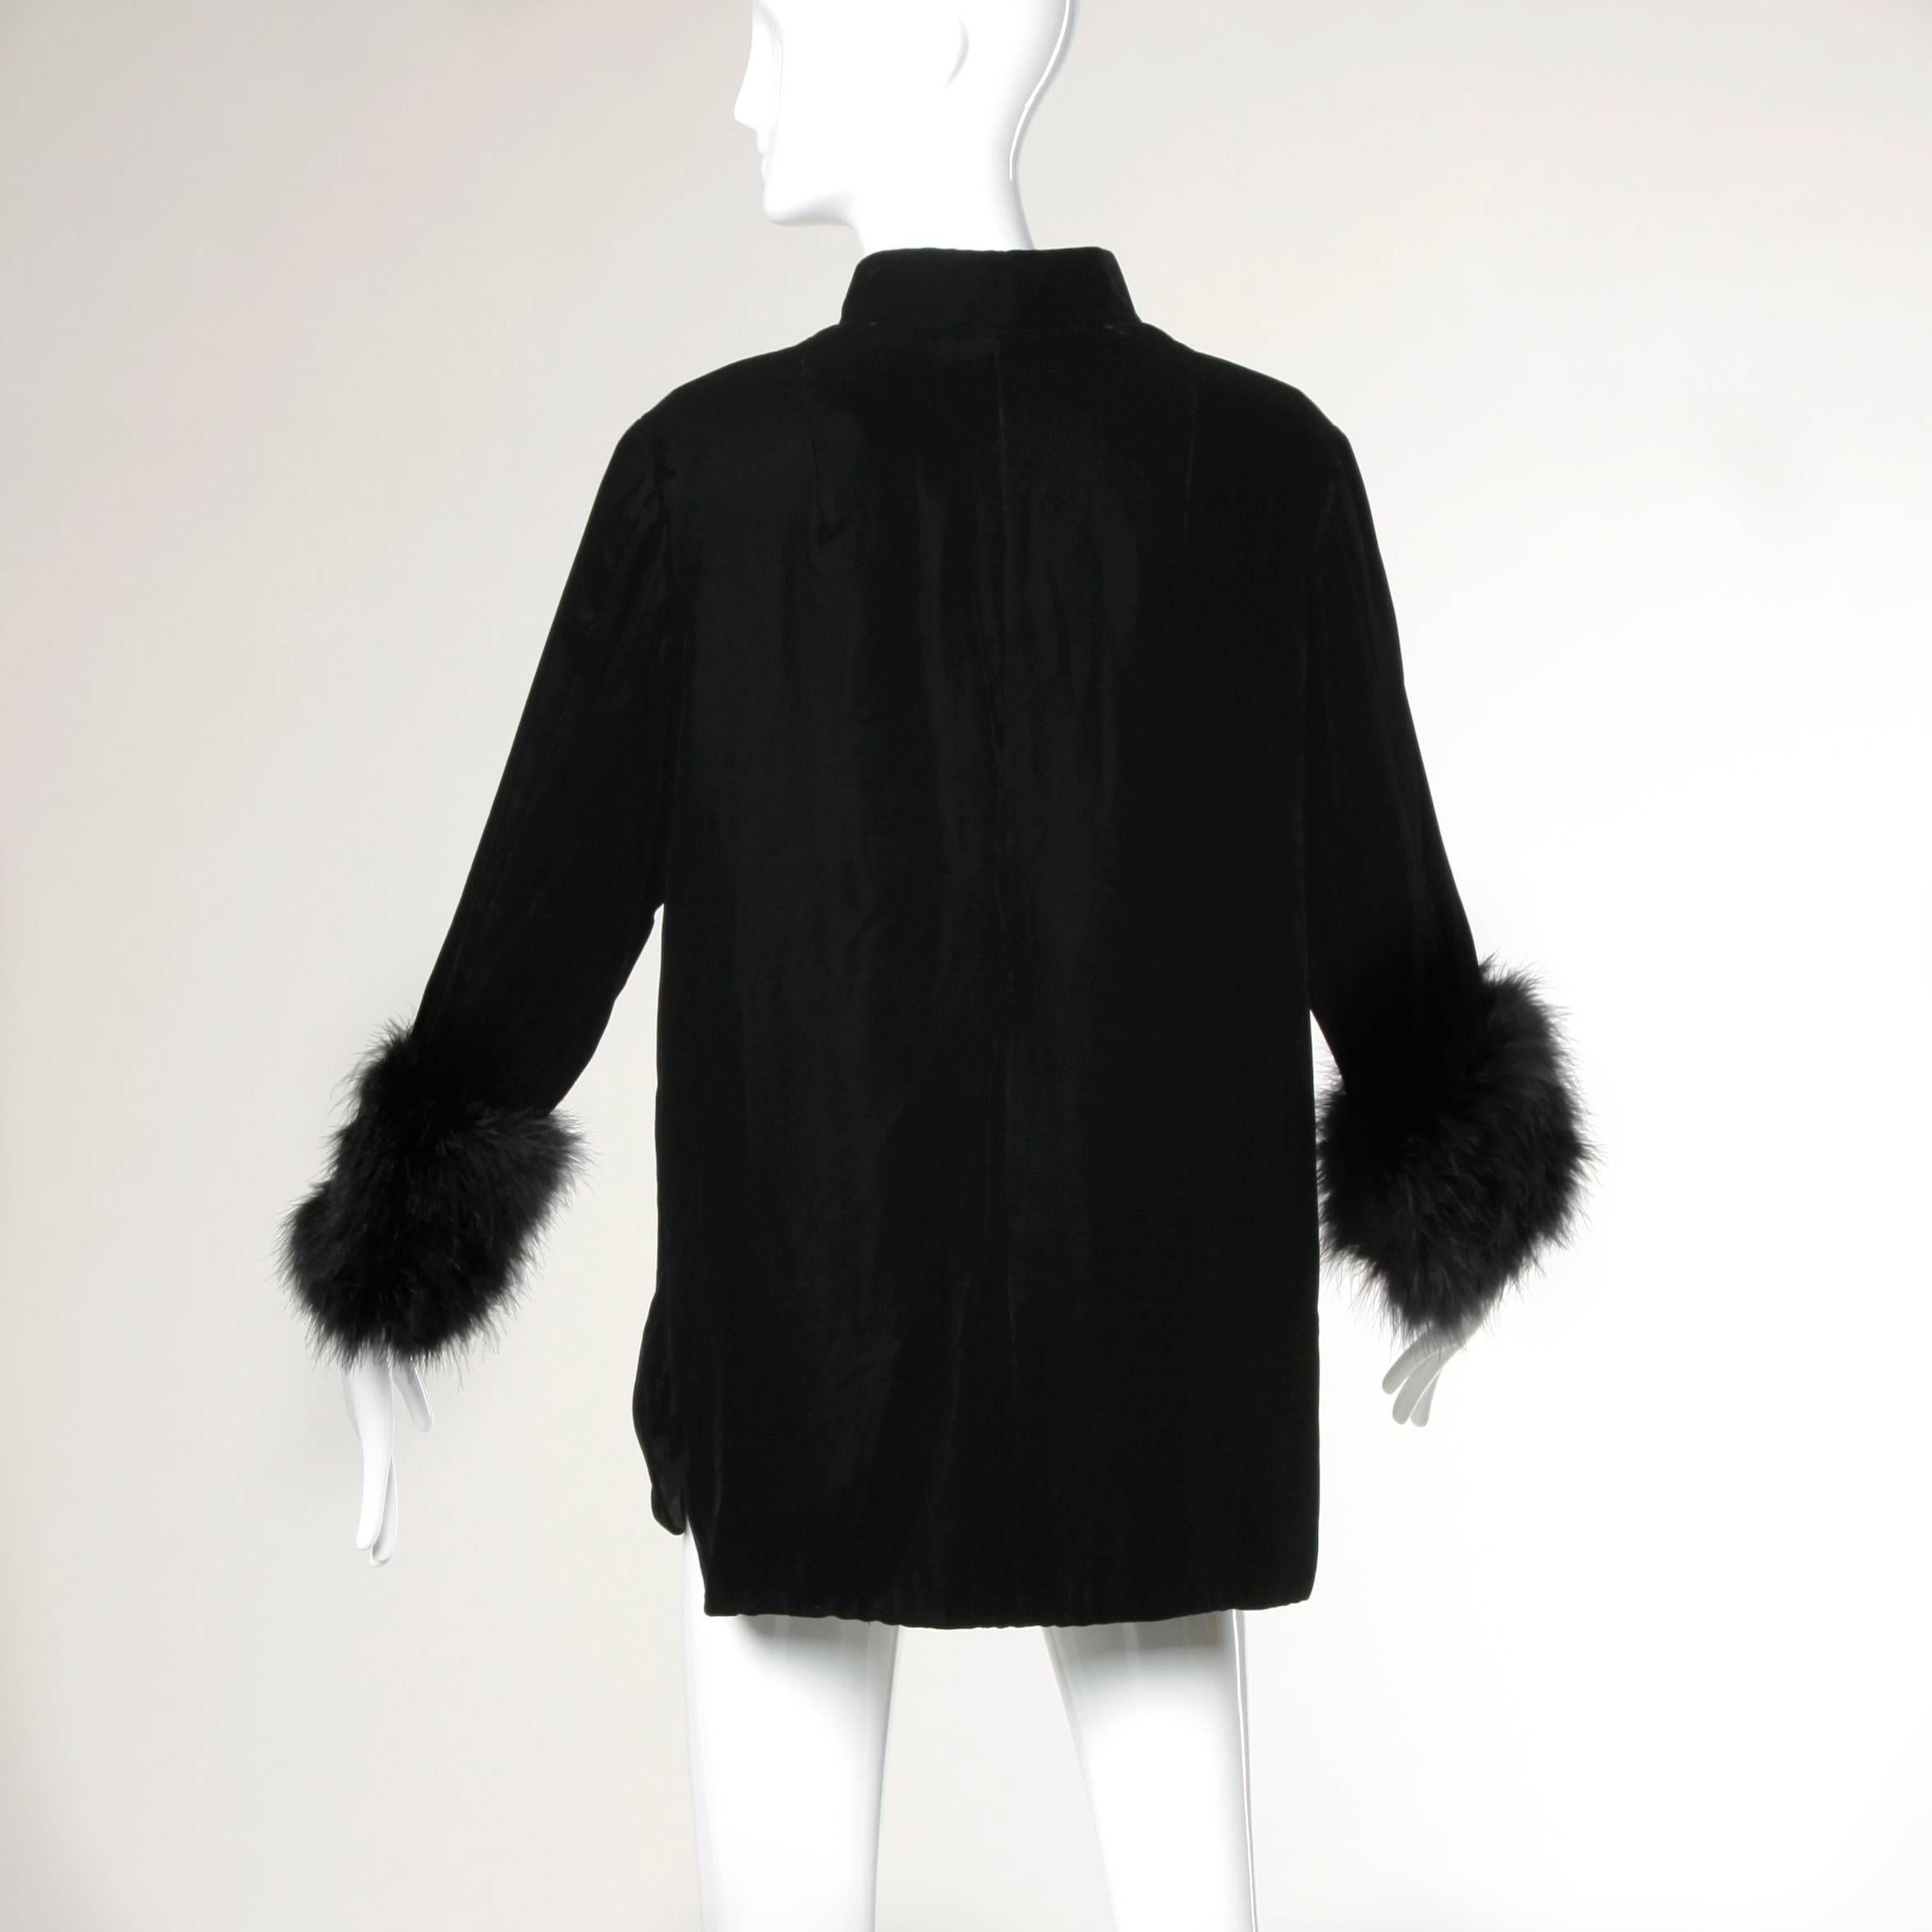 jacket with feather cuffs